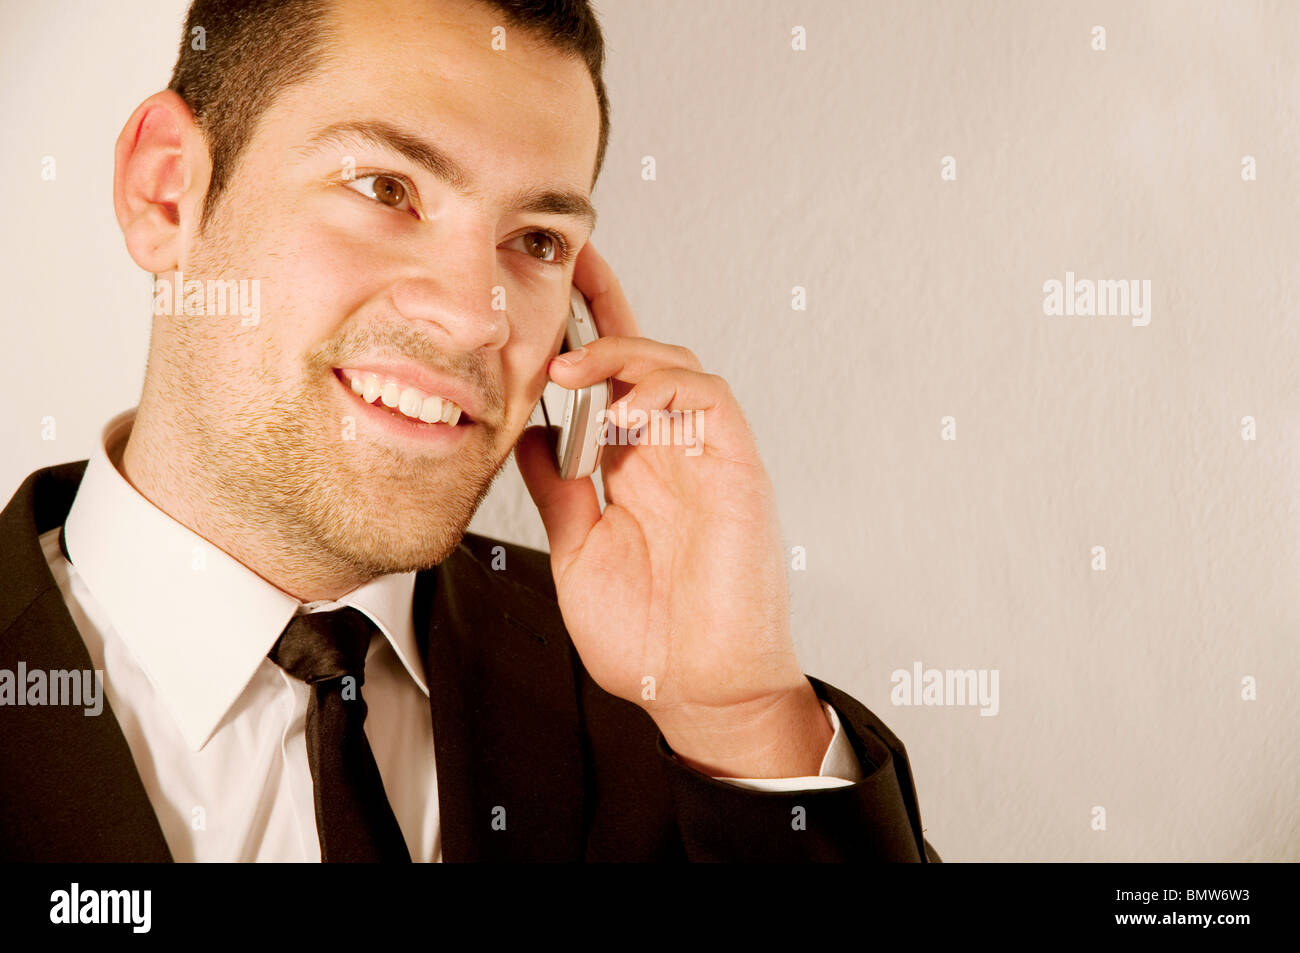 Young man using mobile phone. Close view. Stock Photo